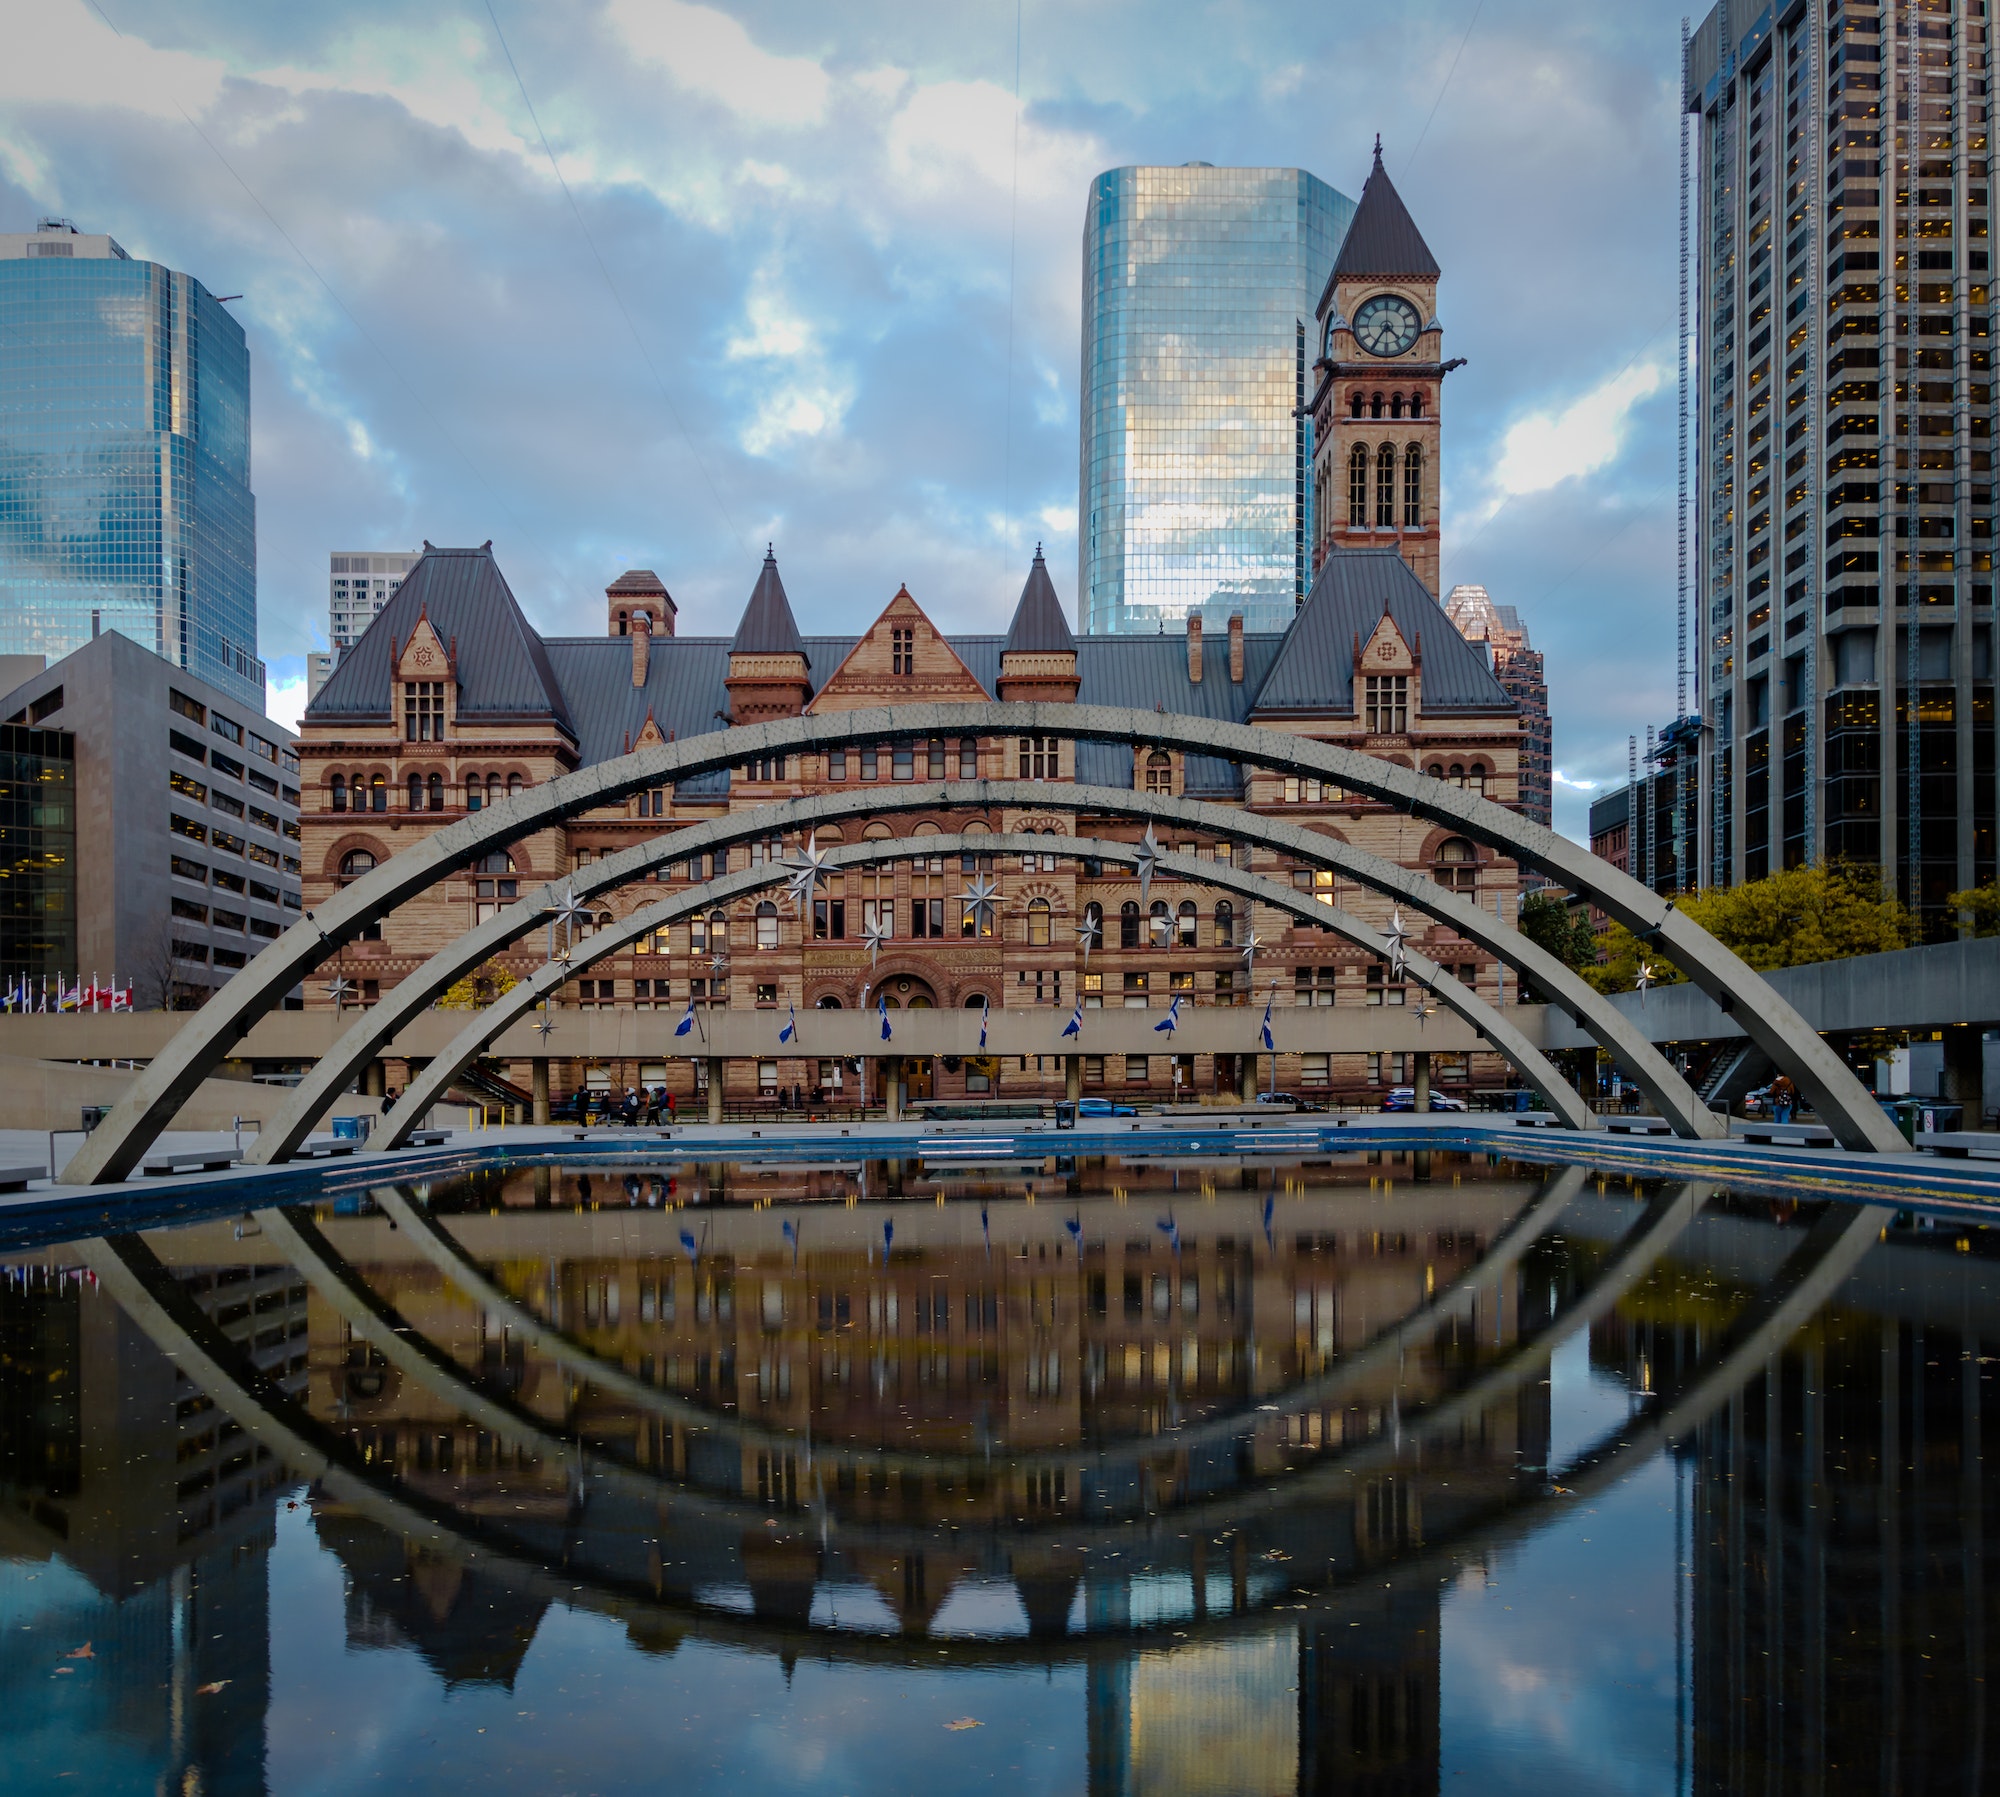 Nathan Phillips Square and Old City Hall - Toronto, Ontario, Canada